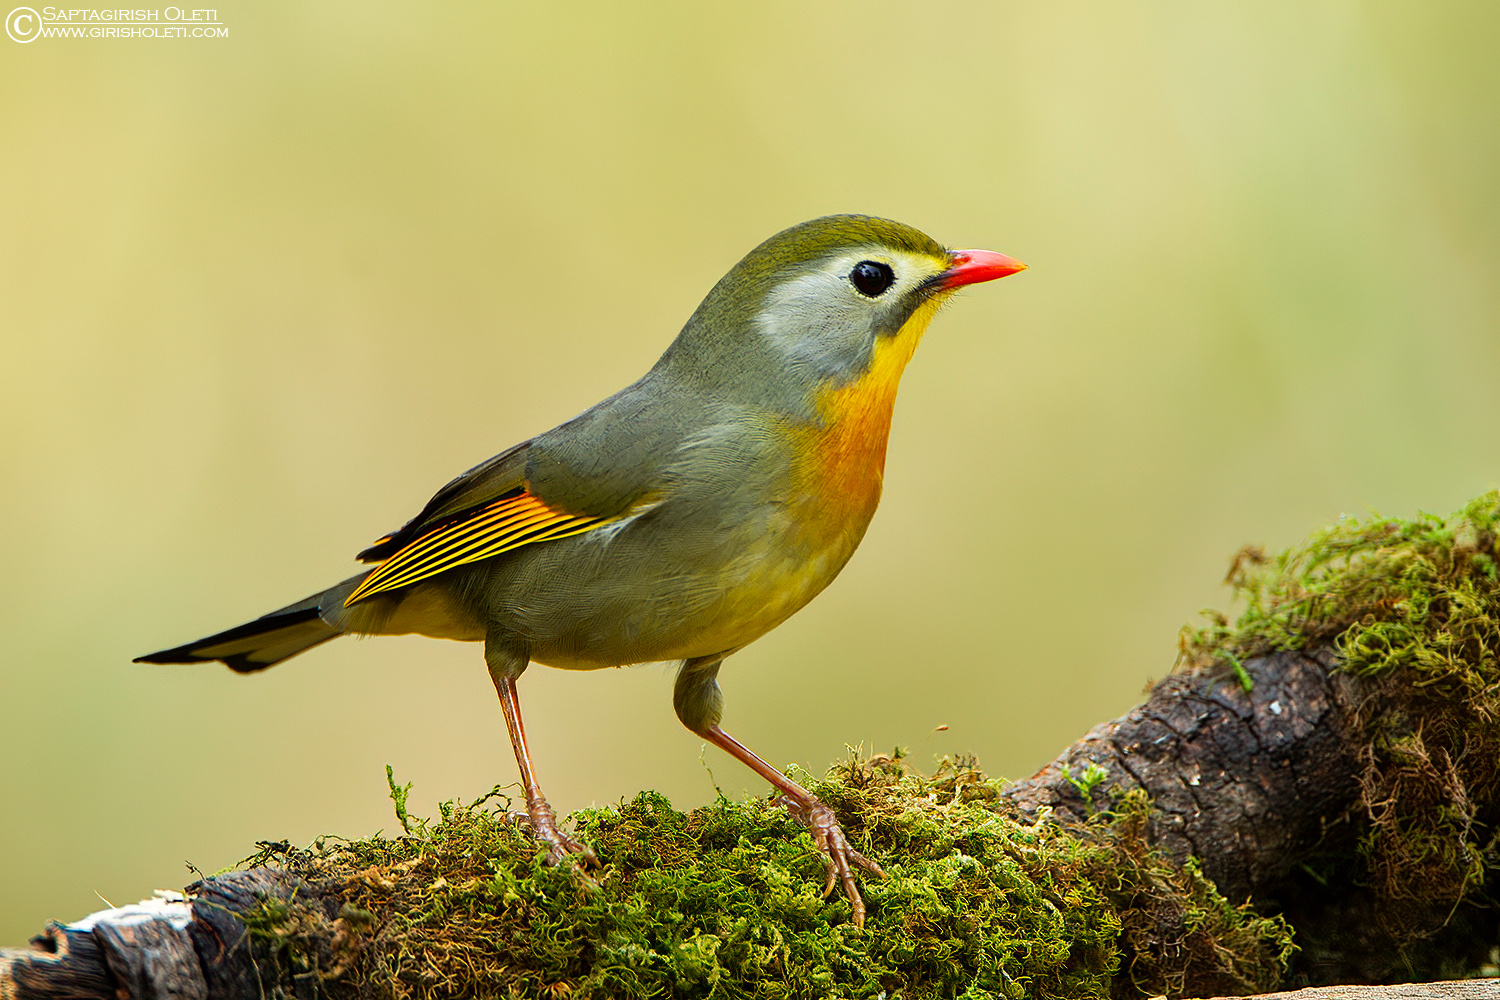 Red-billed Leiothrix photographed at Sattal, India